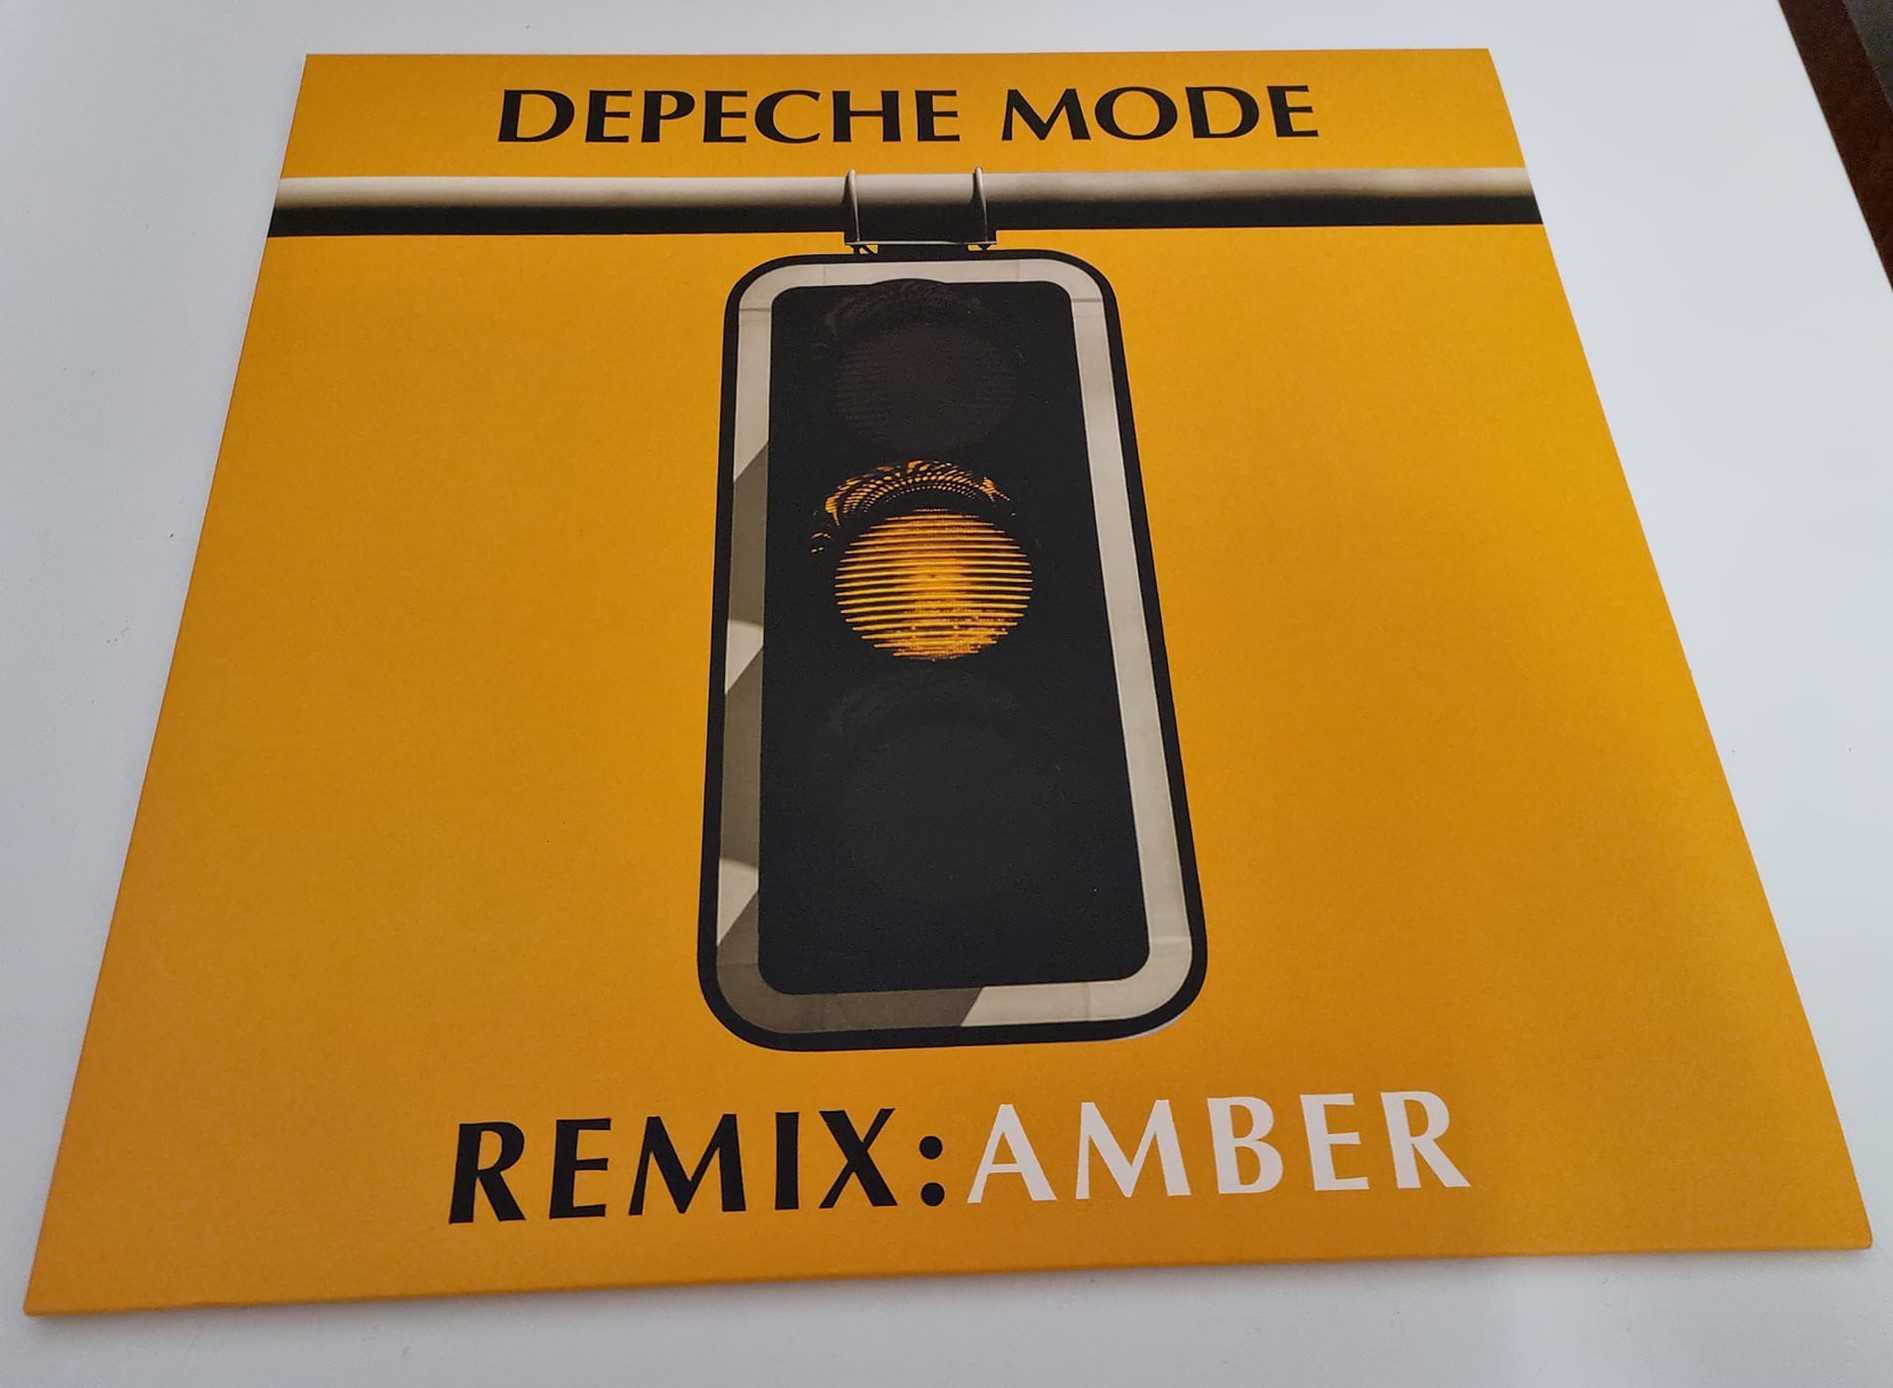 Buy this rare Depeche Mode record by clicking here